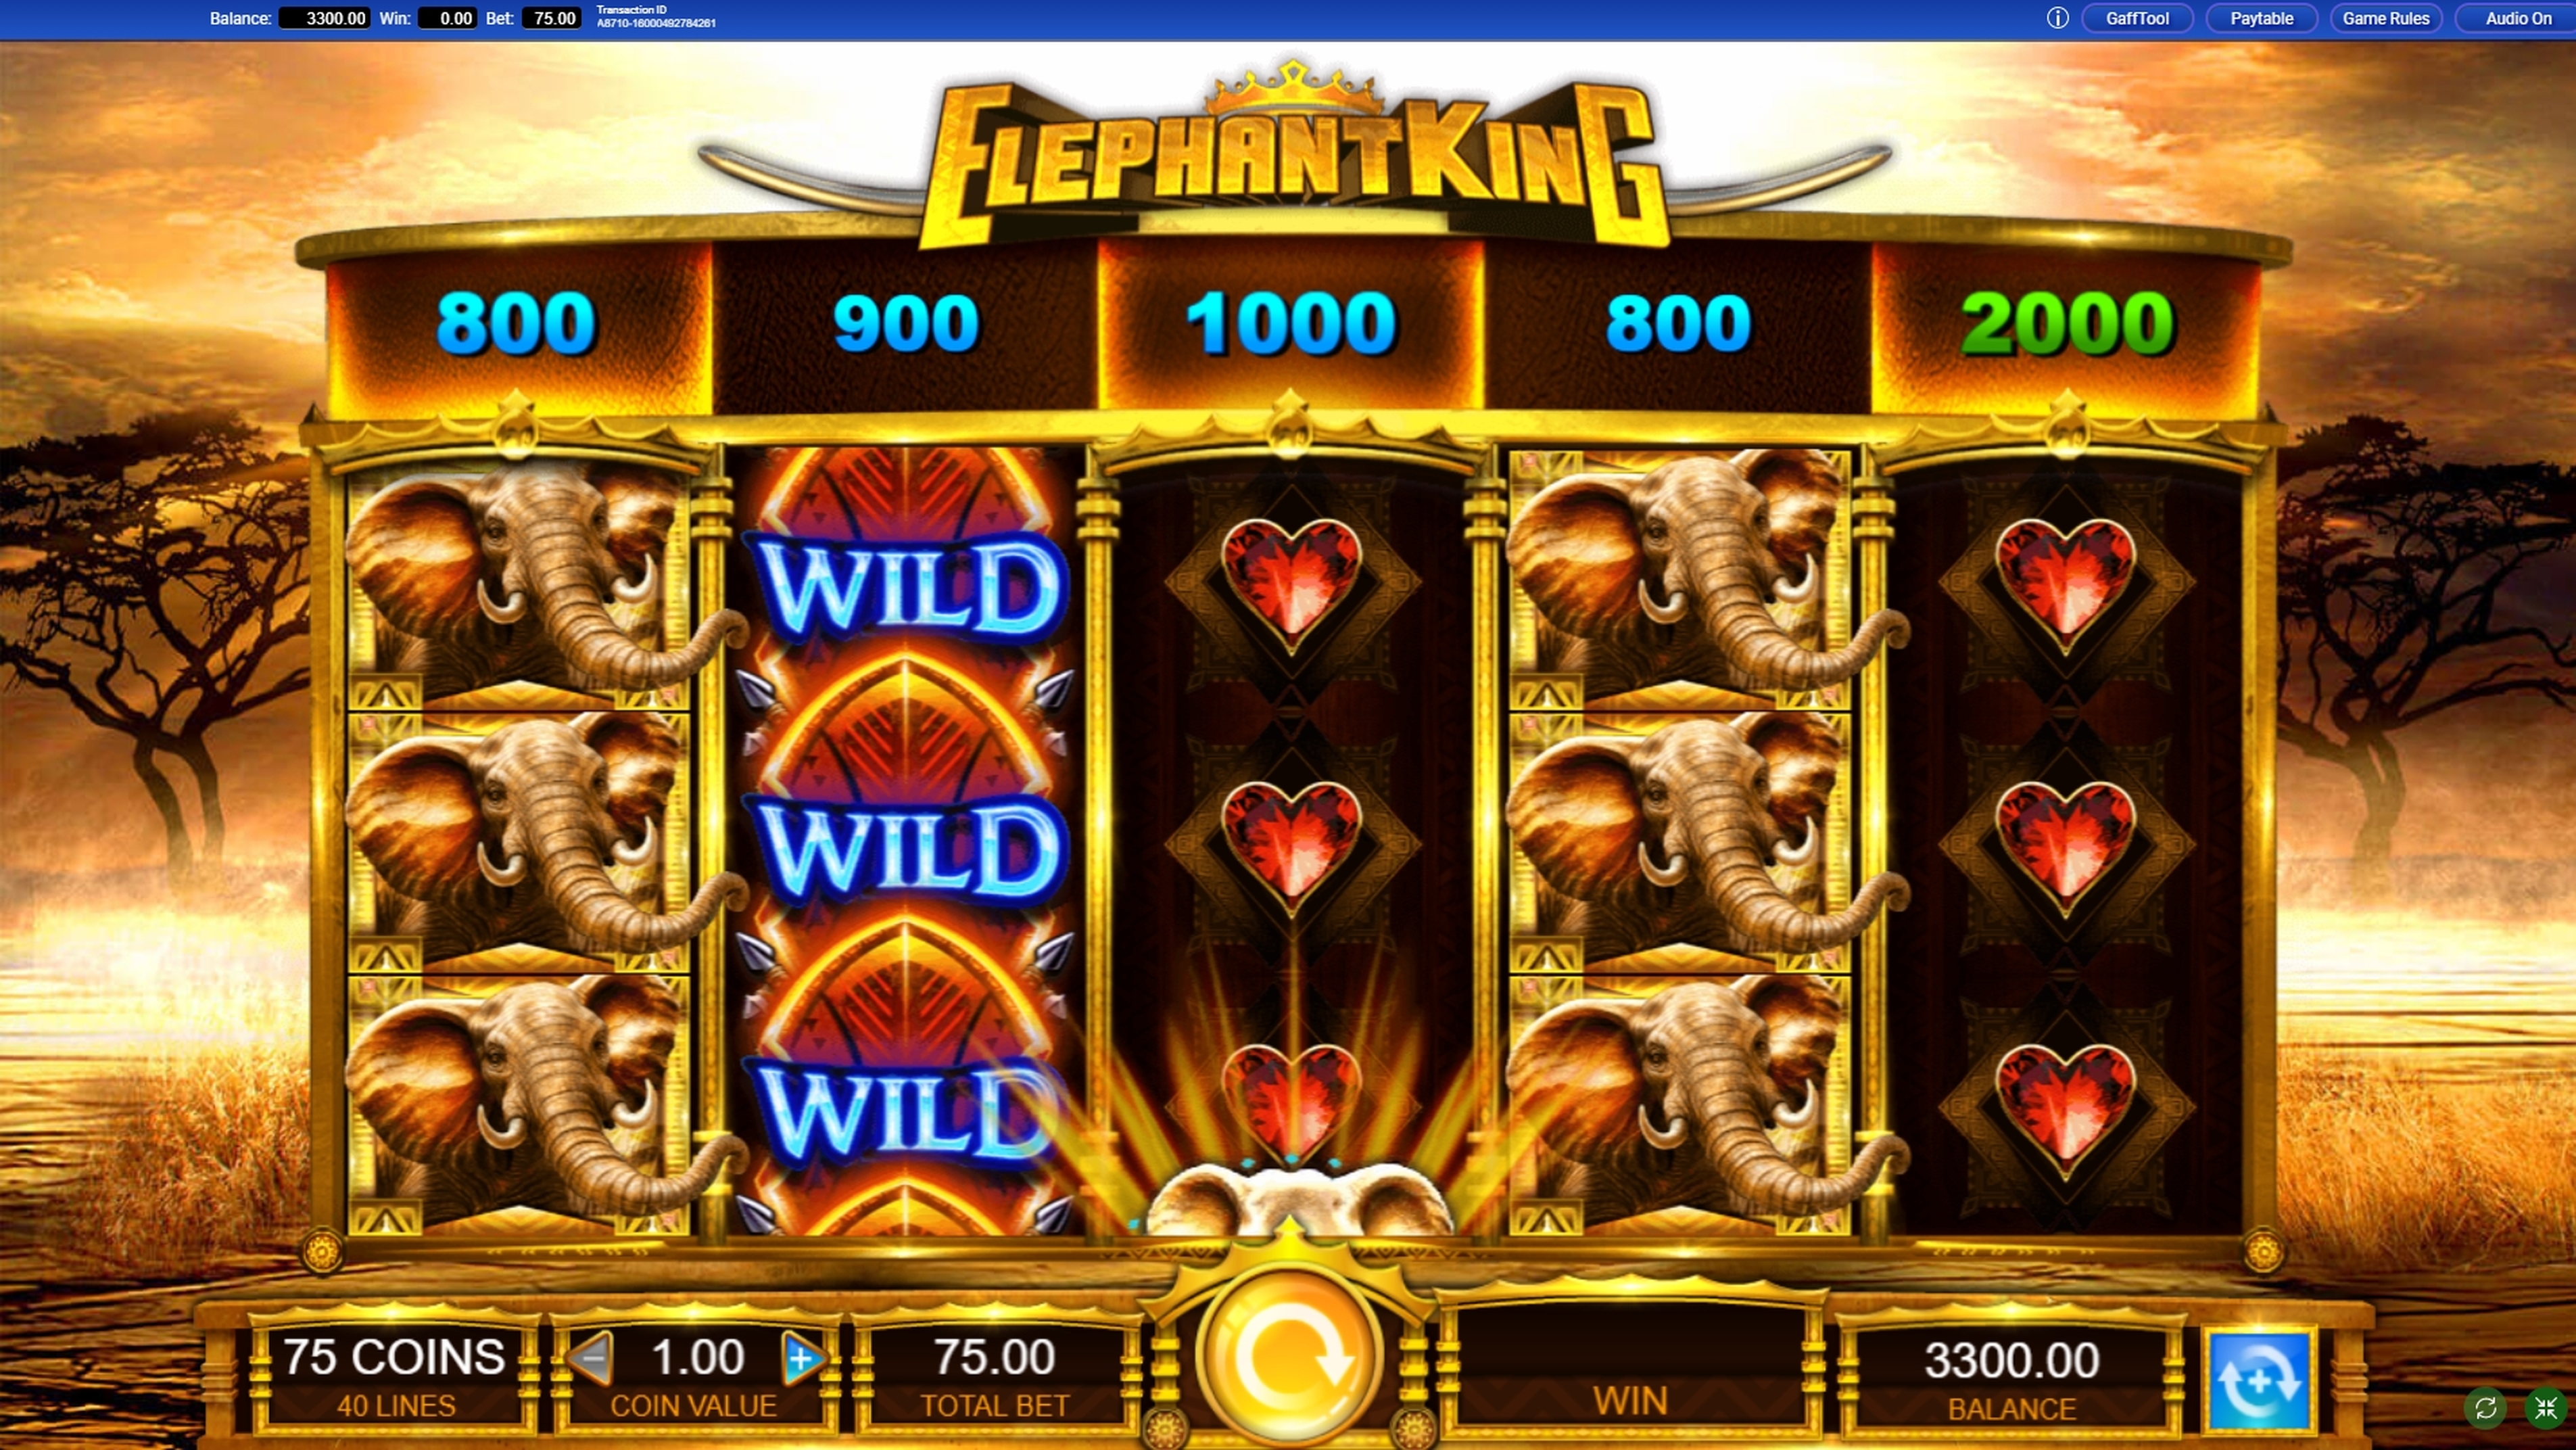 Reels in Elephant King Slot Game by IGT